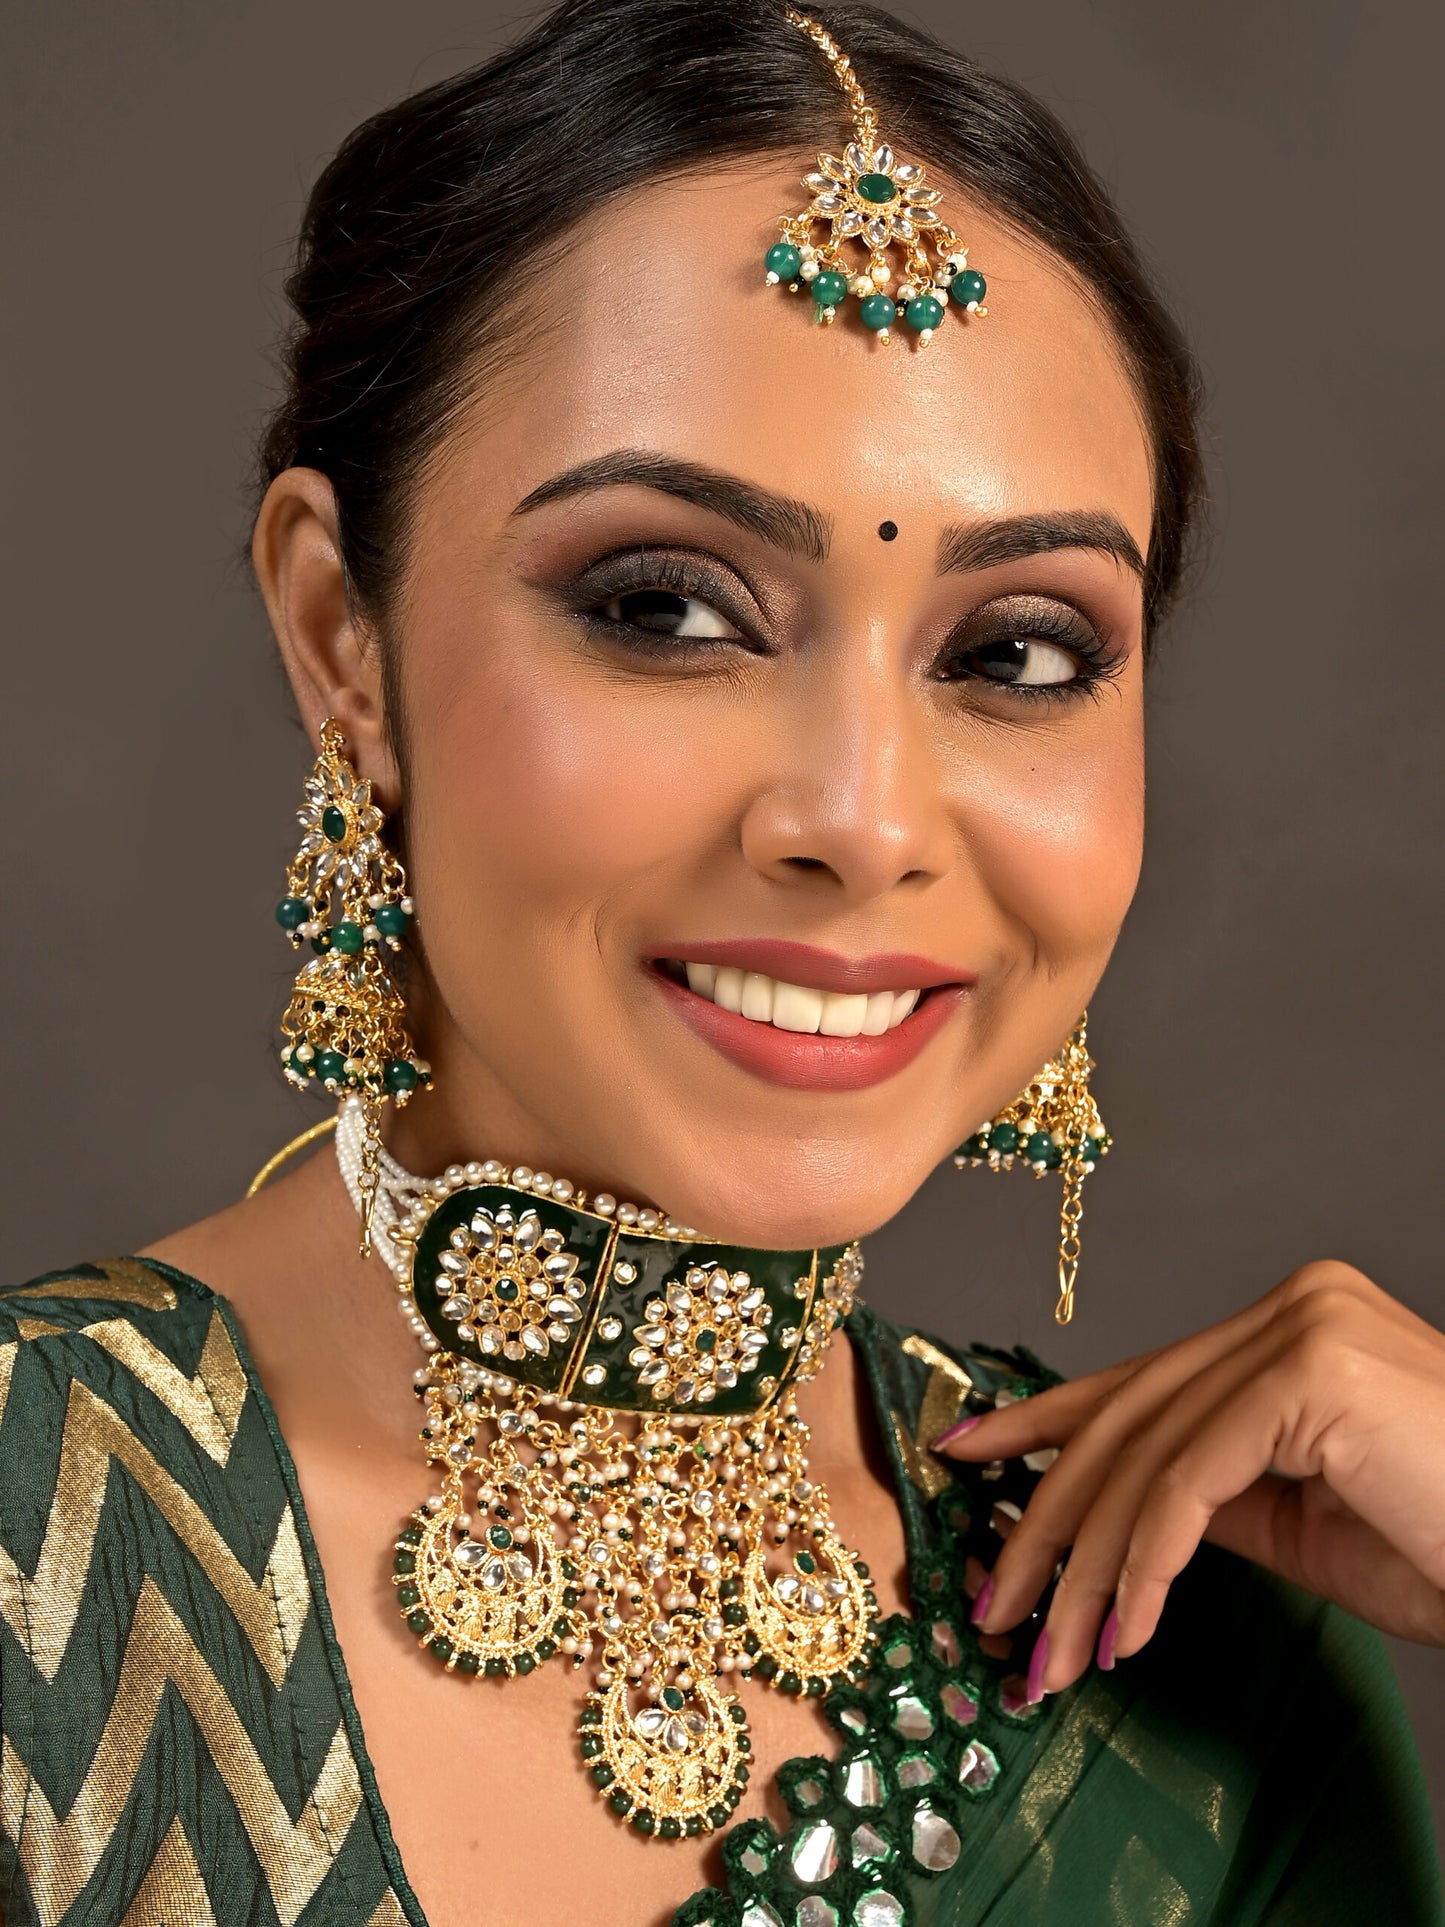 Exclusive Rajasthani Gold Imitation Kundan and Meenakari Choker Necklace Set with Earrings in Green Beads